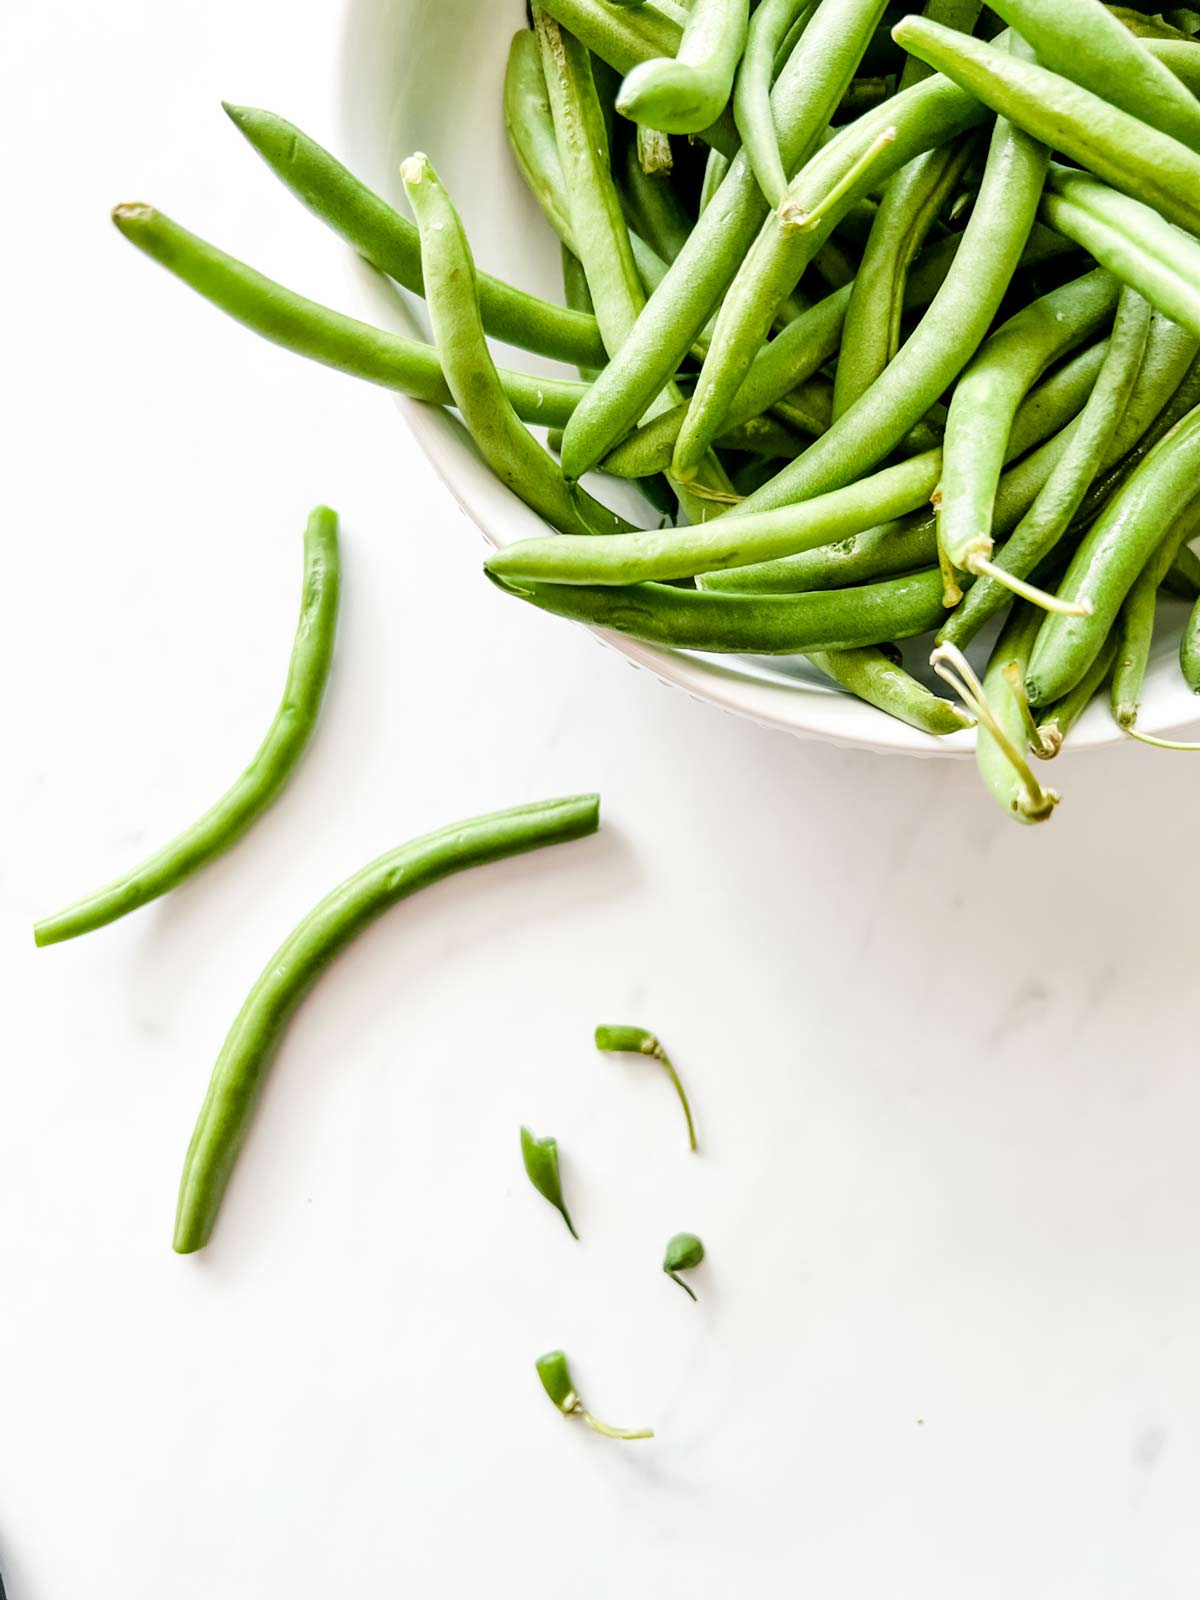 A bowl of green beans next to two green beans that have been trimmed.